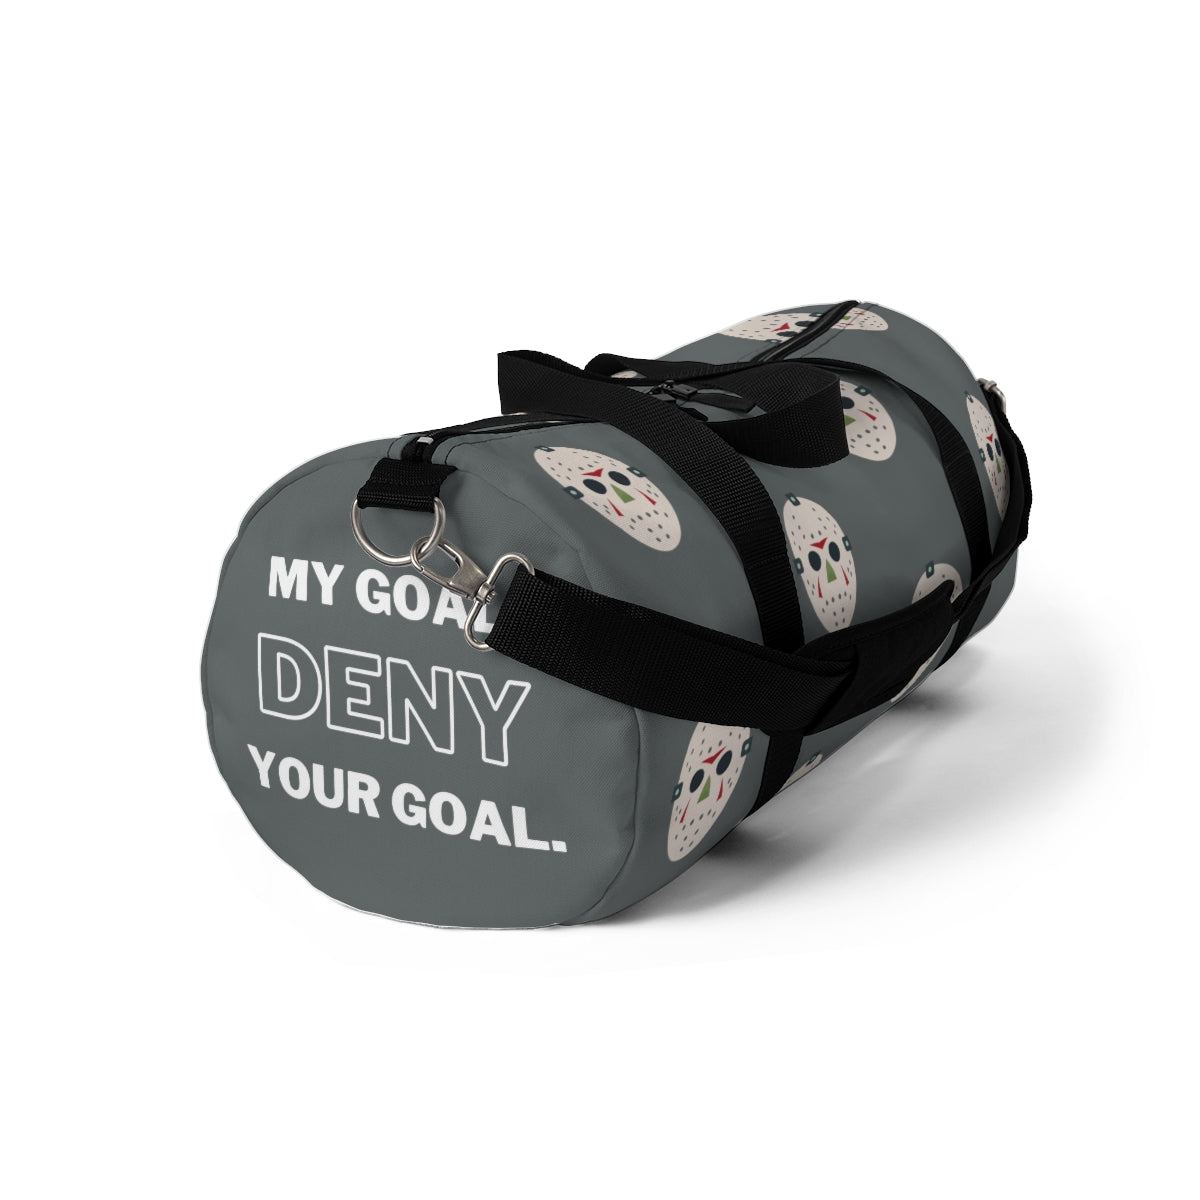 My Goalie is to Deny your Goal- Hockey Tournament Duffel Bag